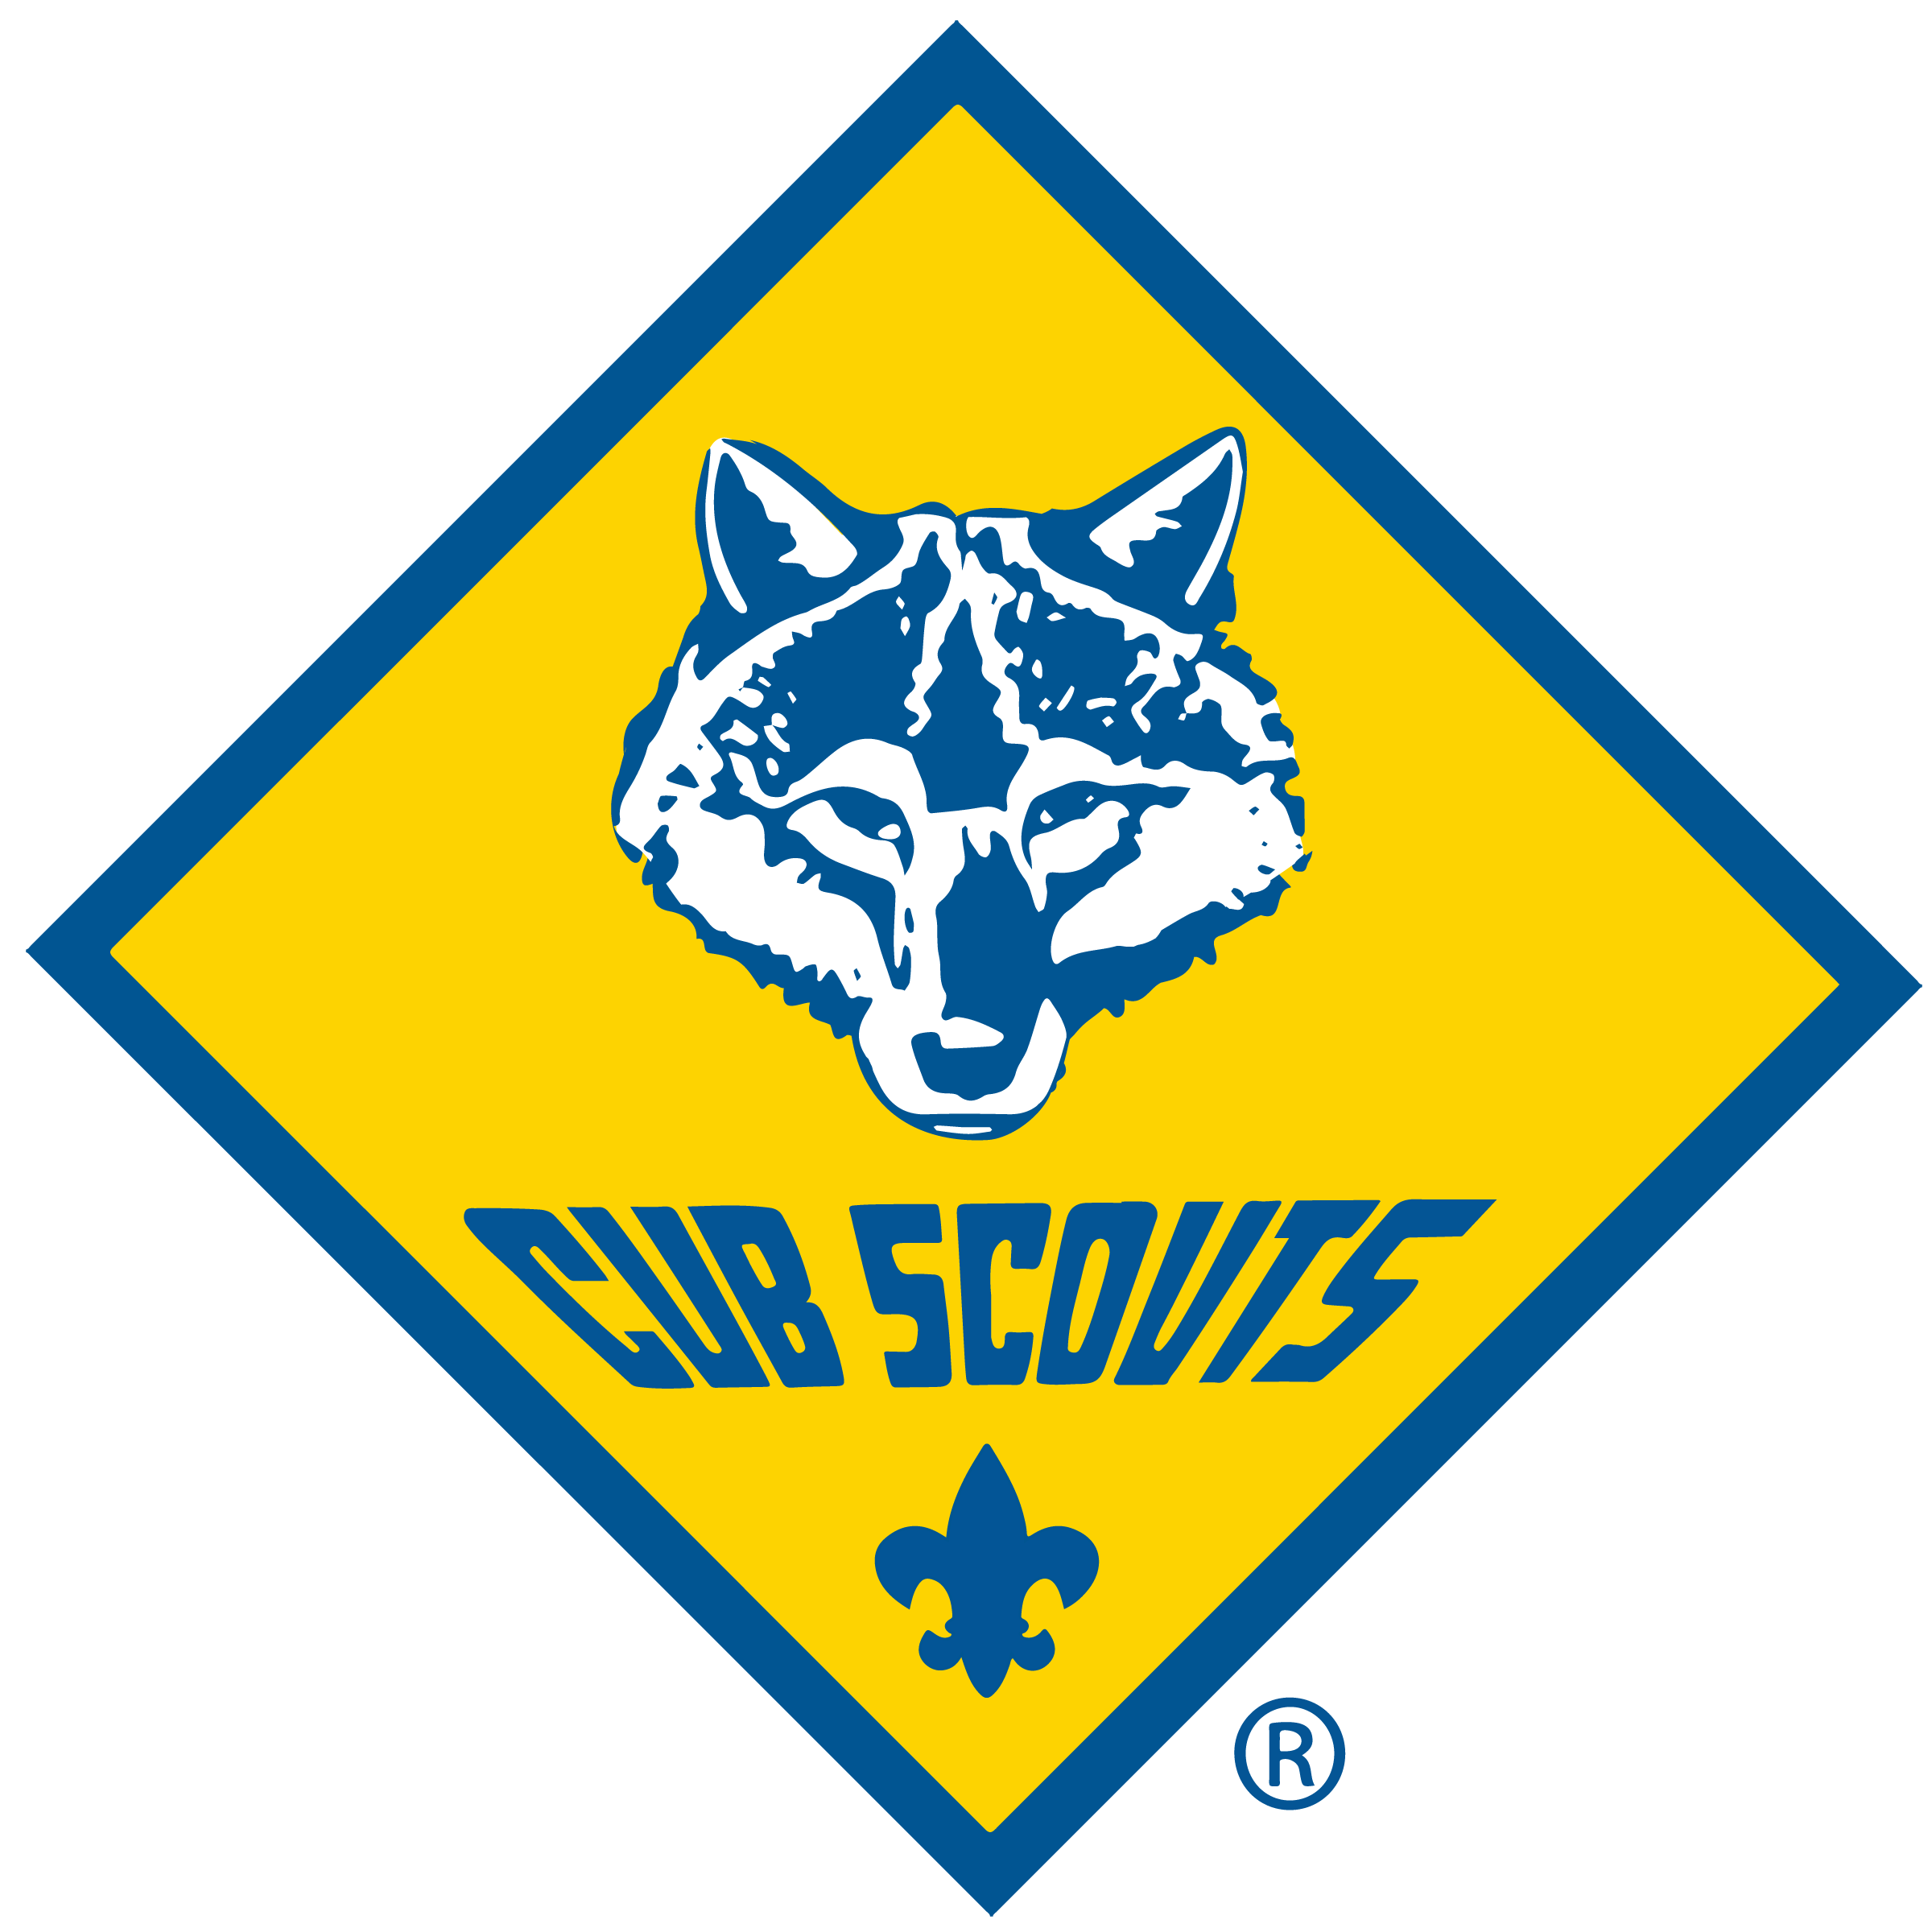 Scout Logo - I was frustrated with the available high resolution versions of the ...